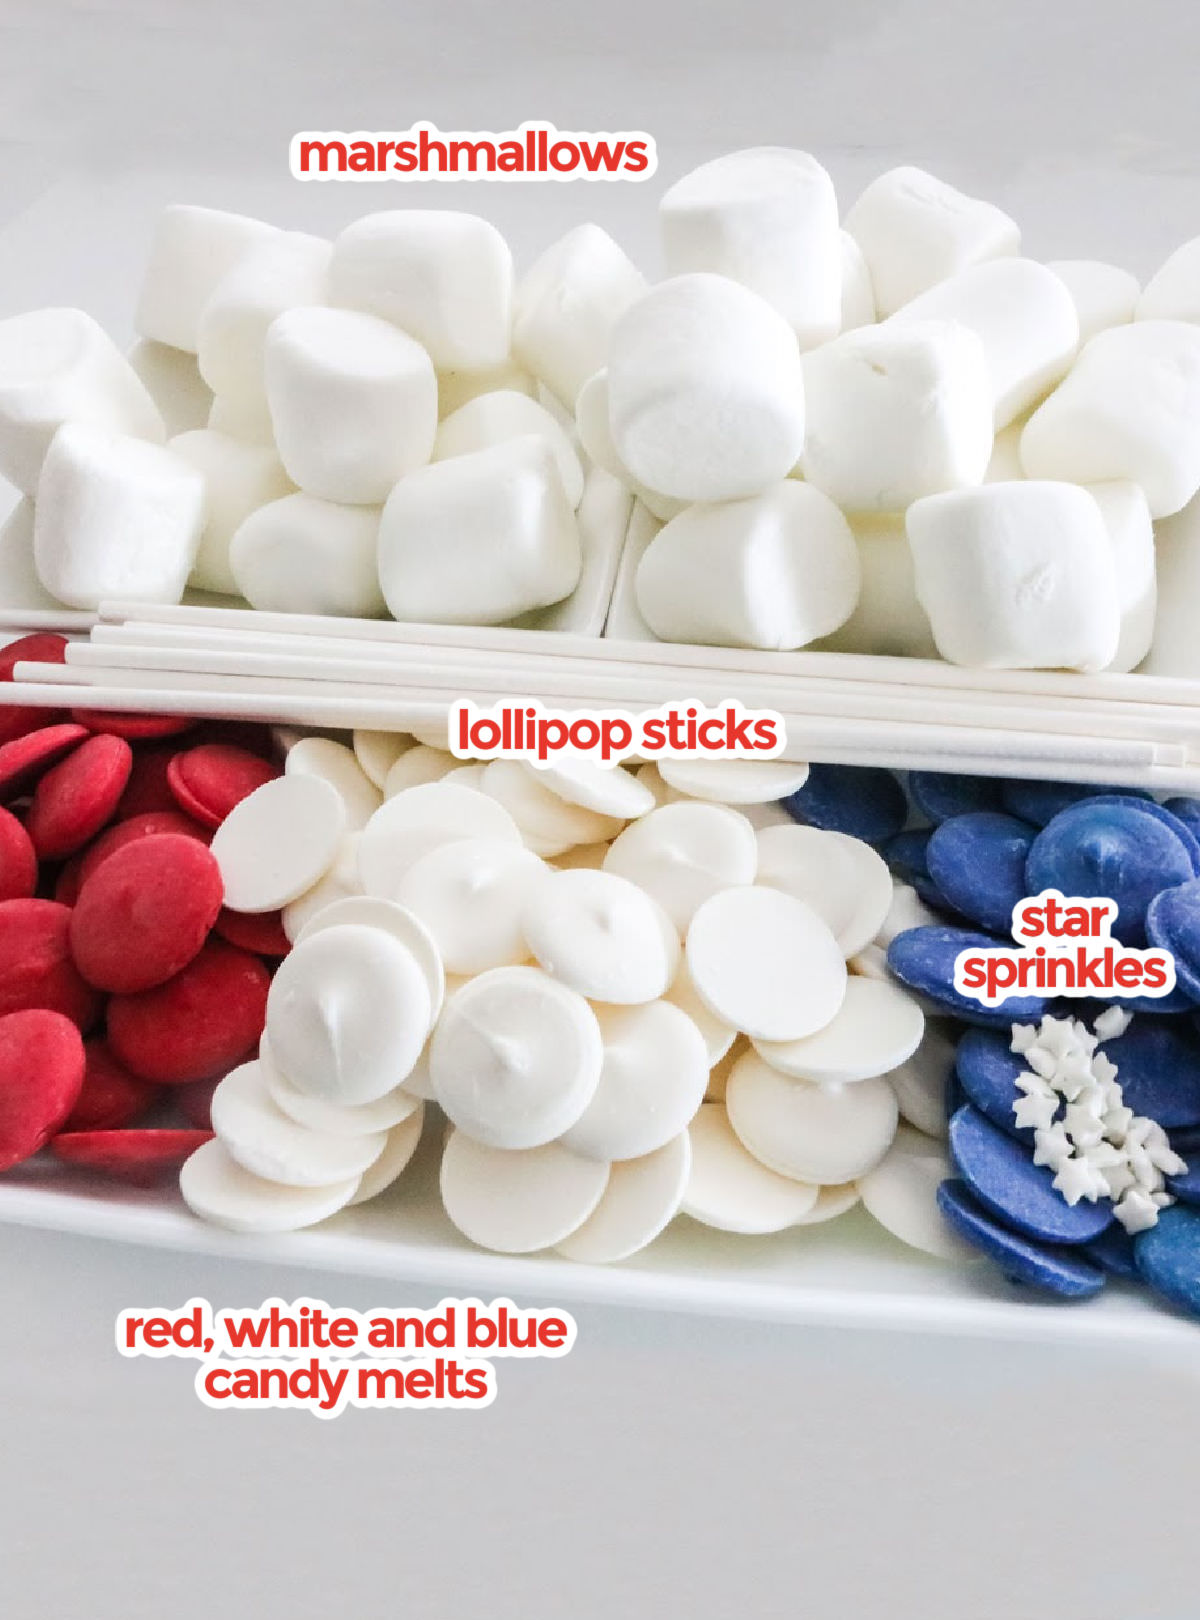 All the ingredients you will need to make American Flag Marshmallow Pops including marshmallows, lollipop sticks, and red, white and blue candy melts.